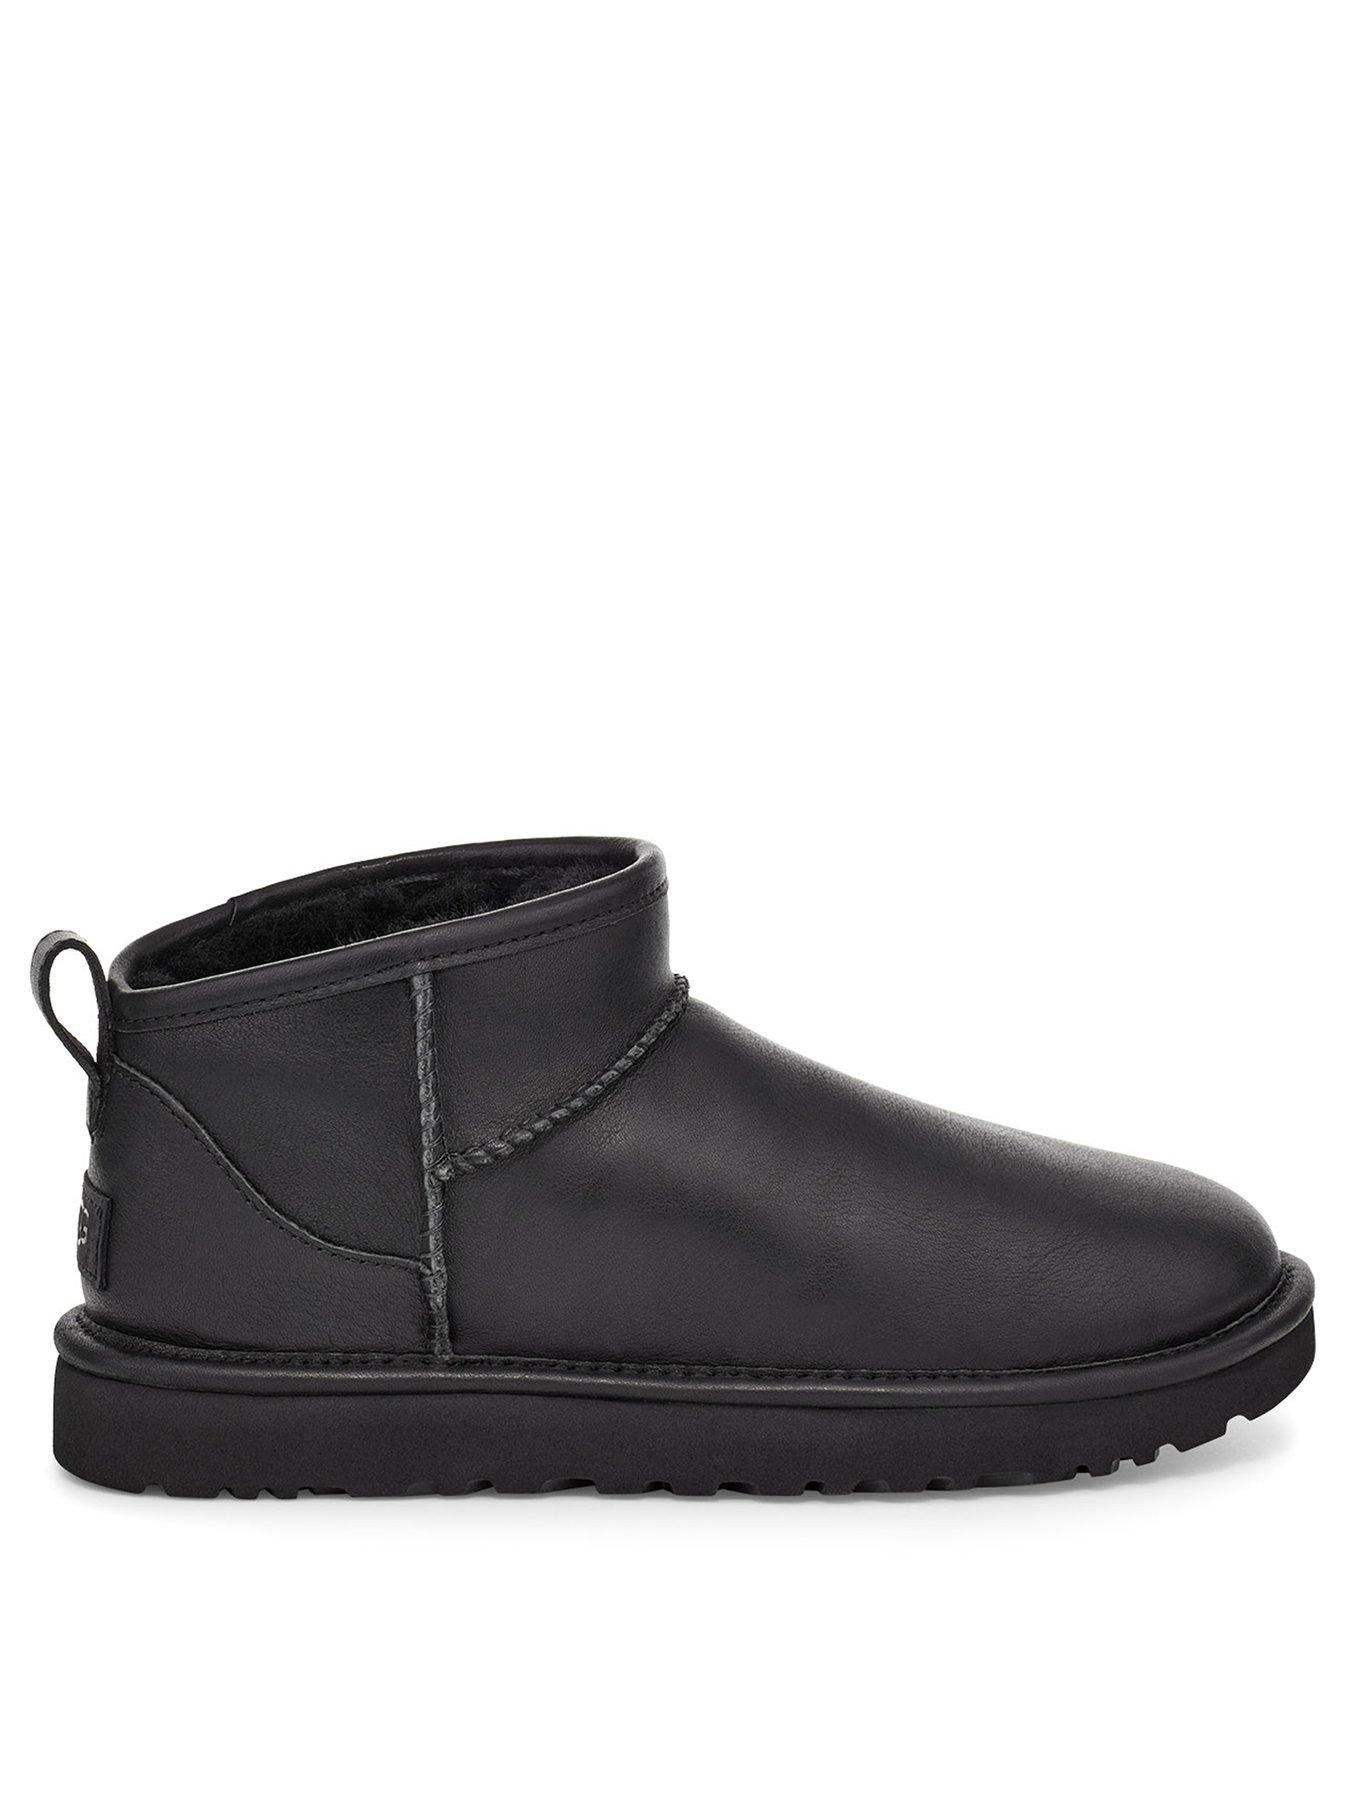 black leather classic ugg boots